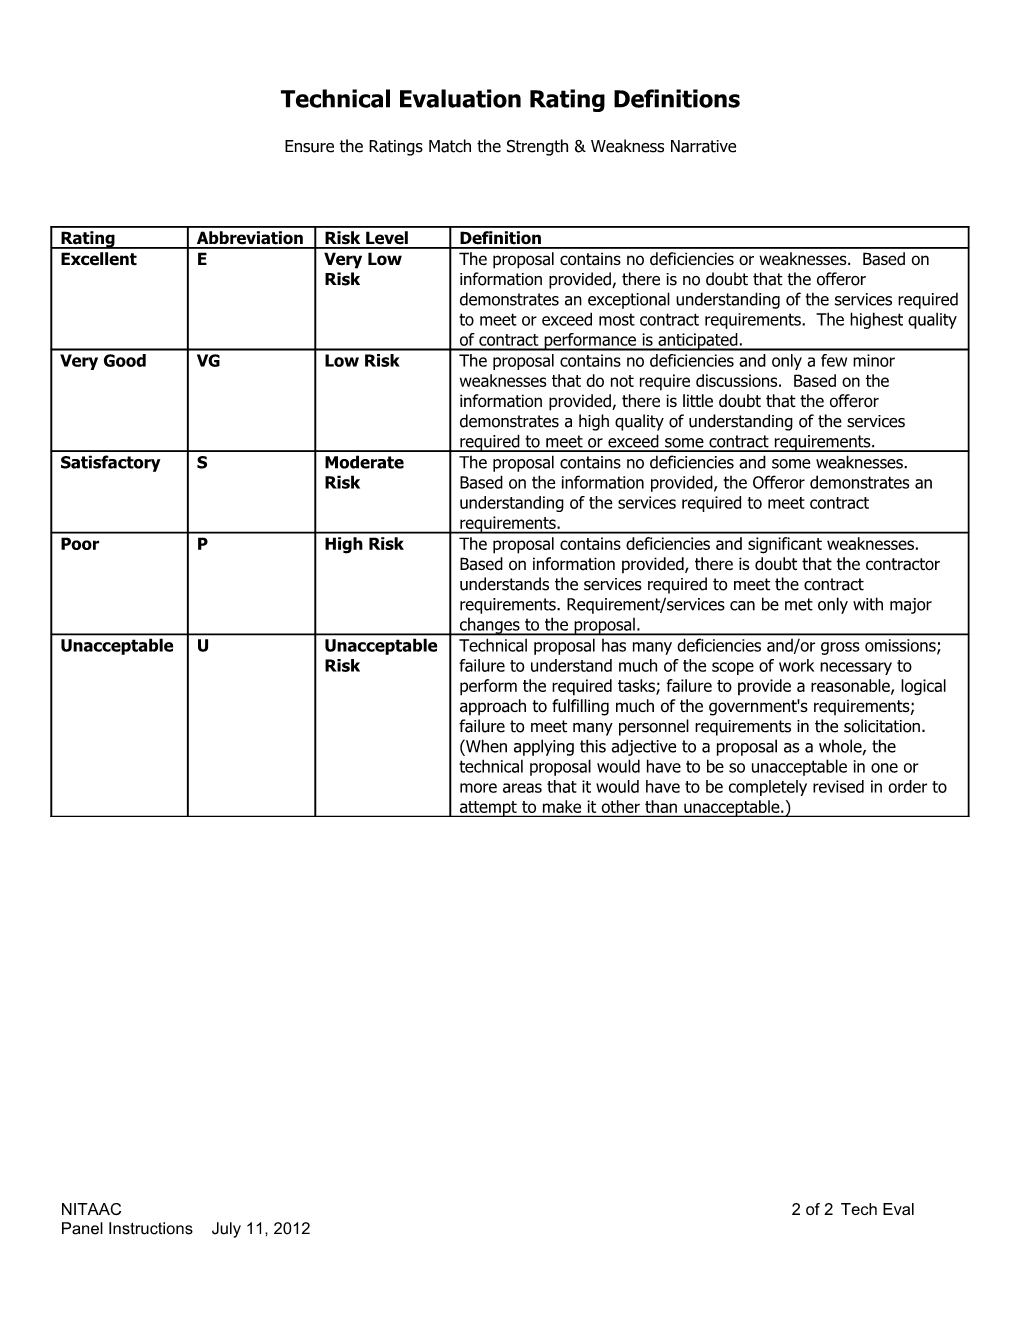 Technical Evaluation Panel Requirements